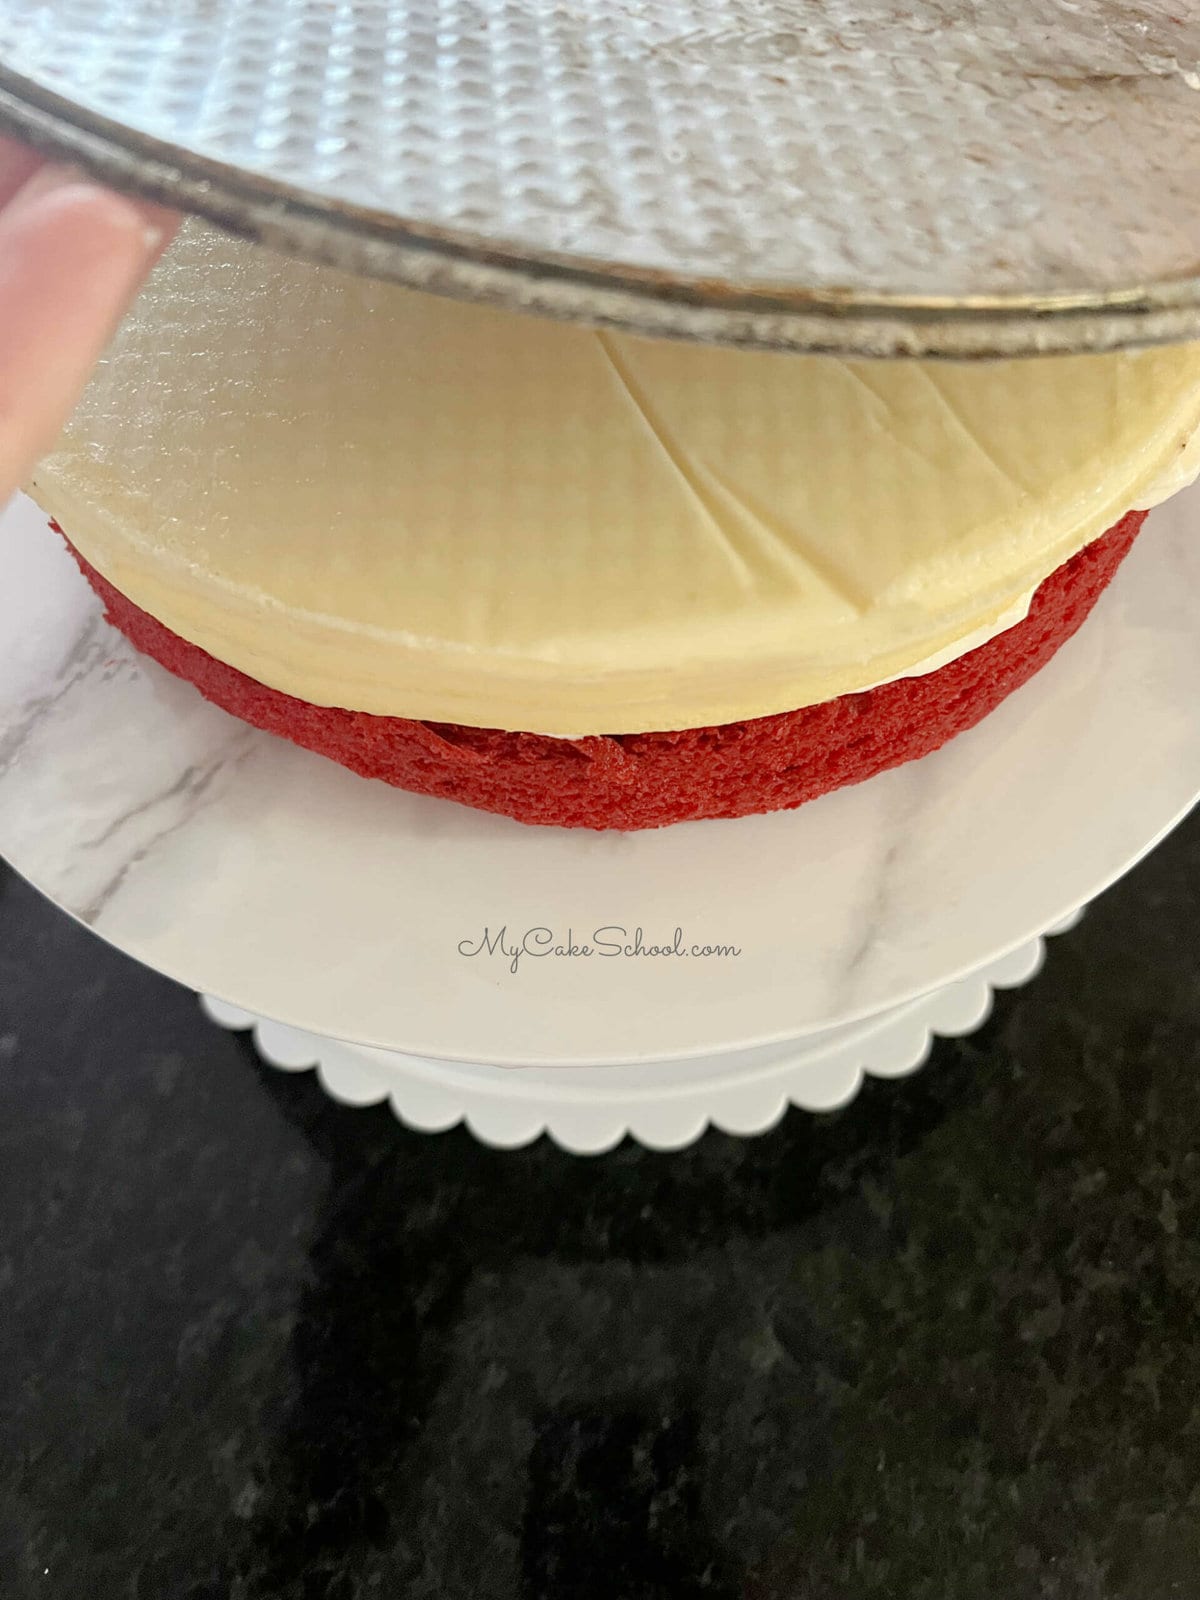 Removing base of springform pan from the cheesecake layer after flipping onto cake layer